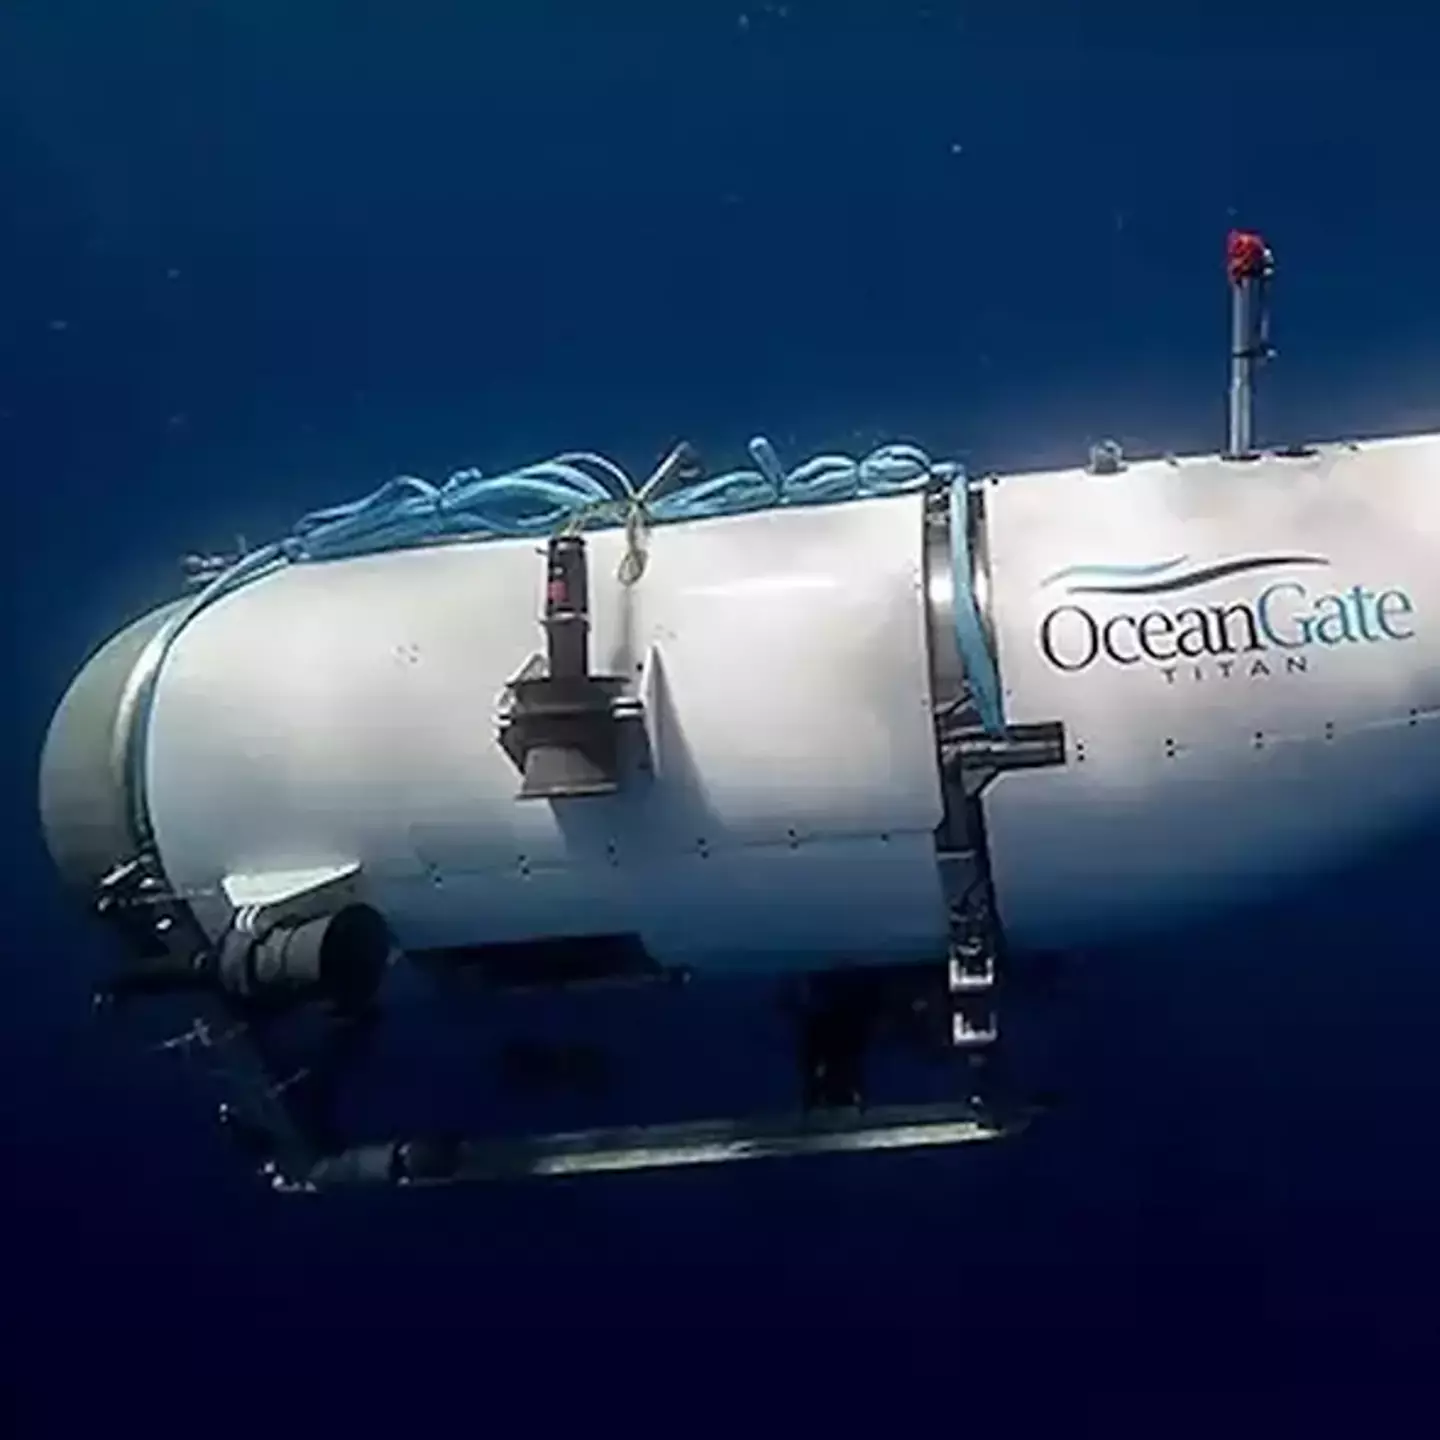 Haunting new audio released of knocking noises from Titan submarine